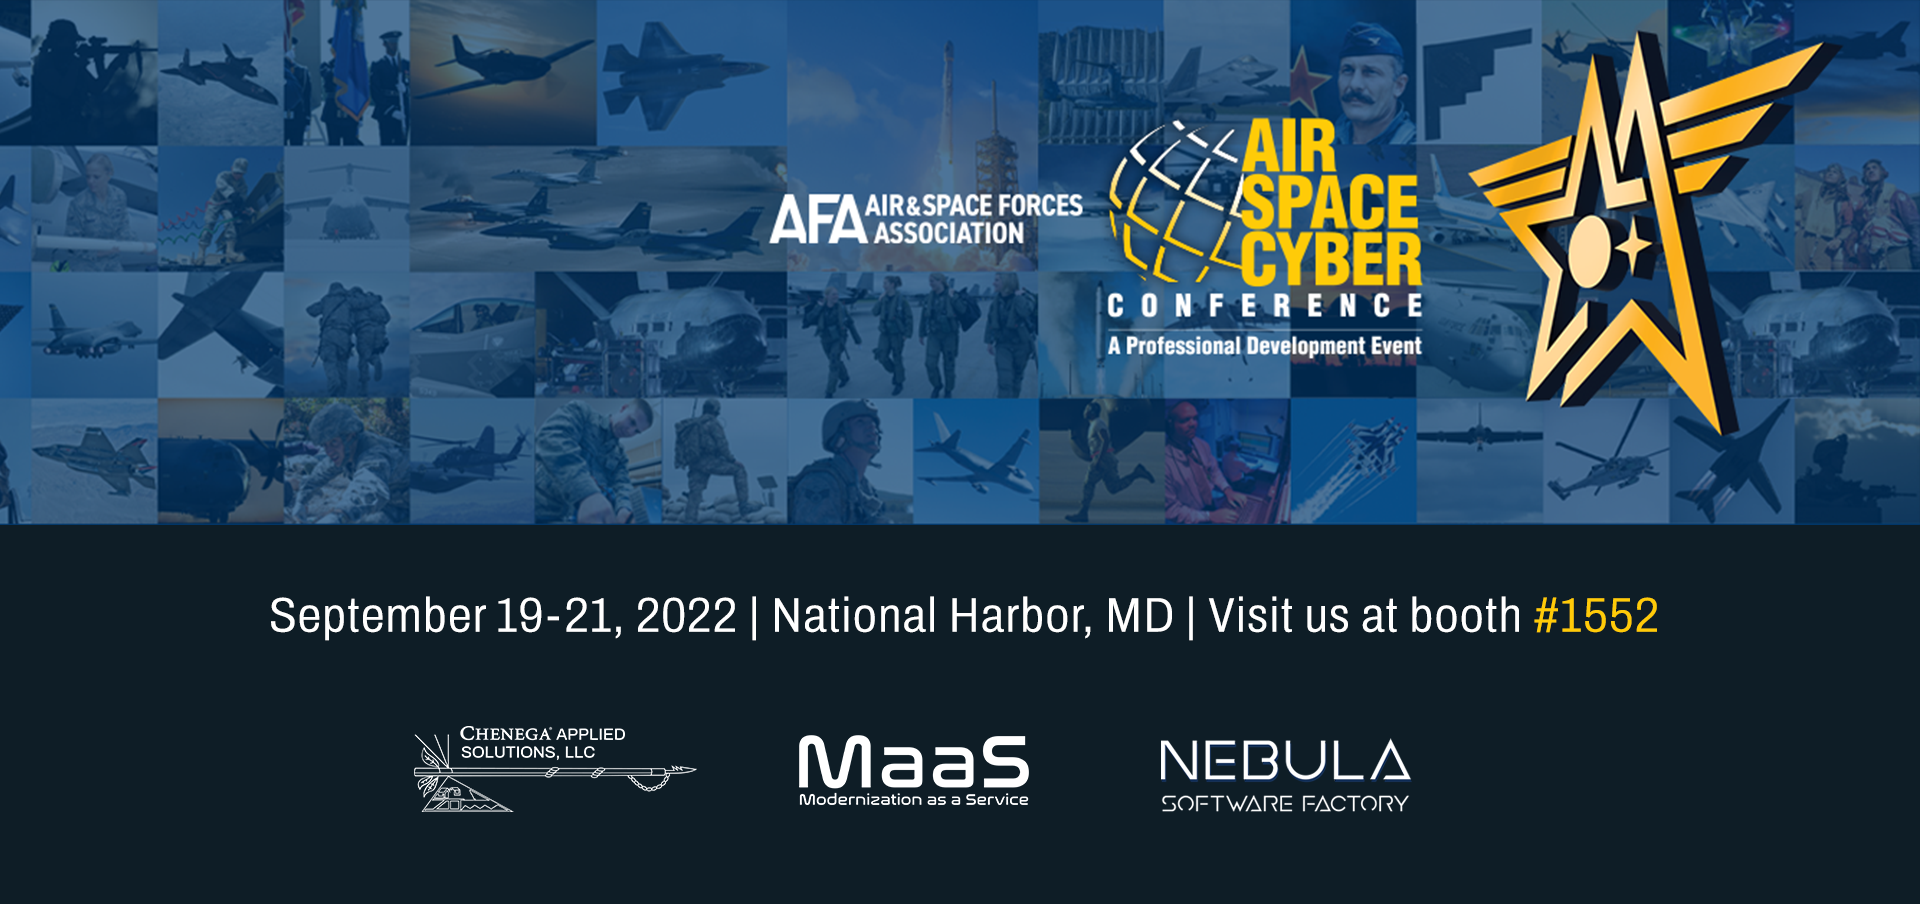 Chenega Applied Solutions Exhibiting at AFA's 2022 Air, Space, & Cyber Conference